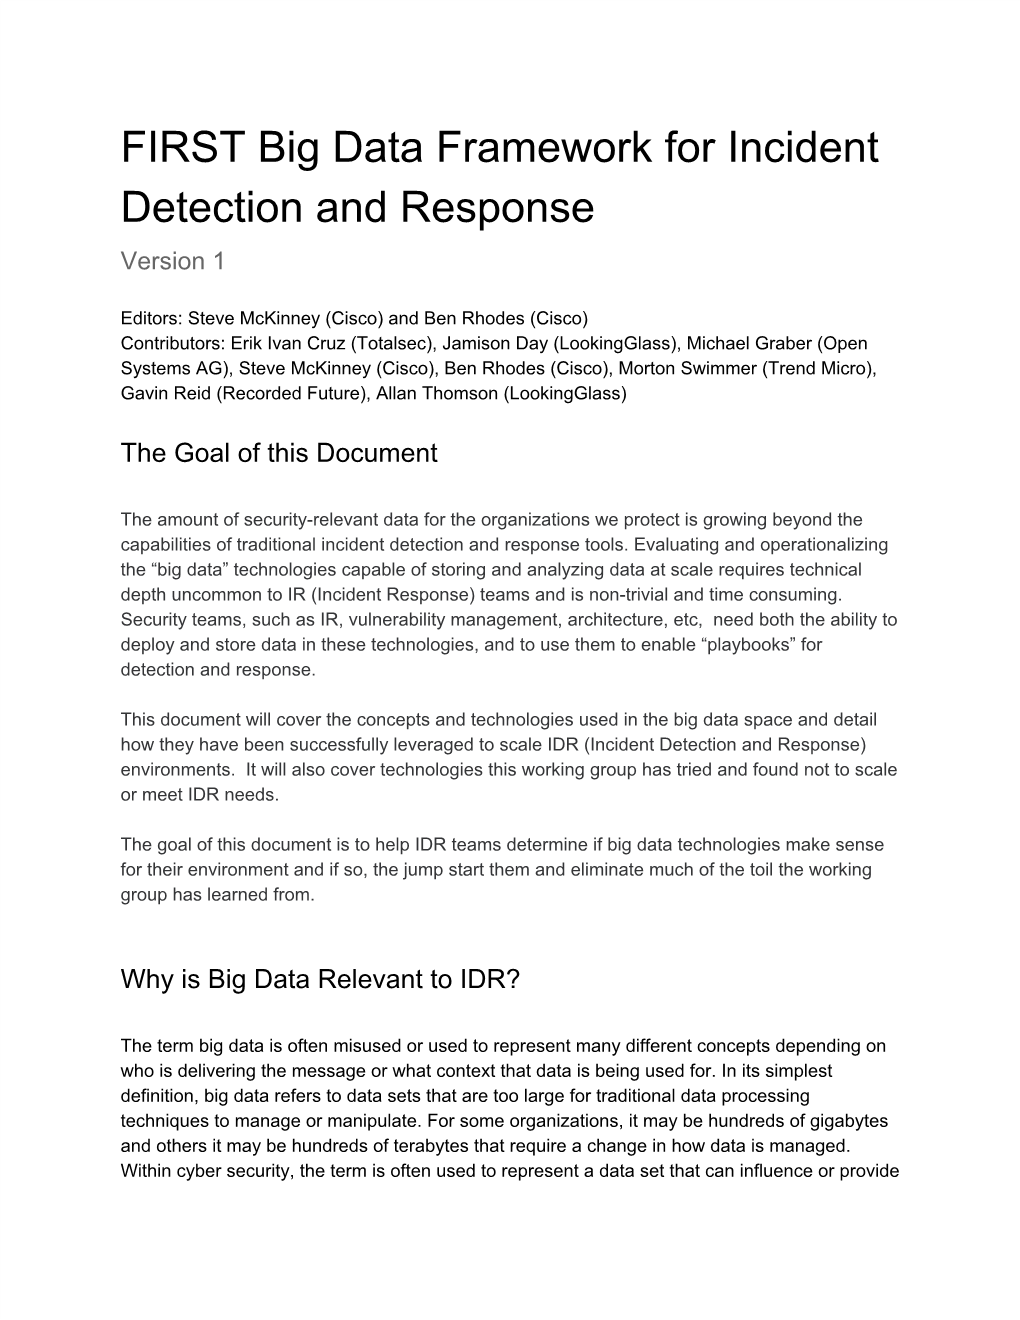 Big Data Architecture for Incident Response